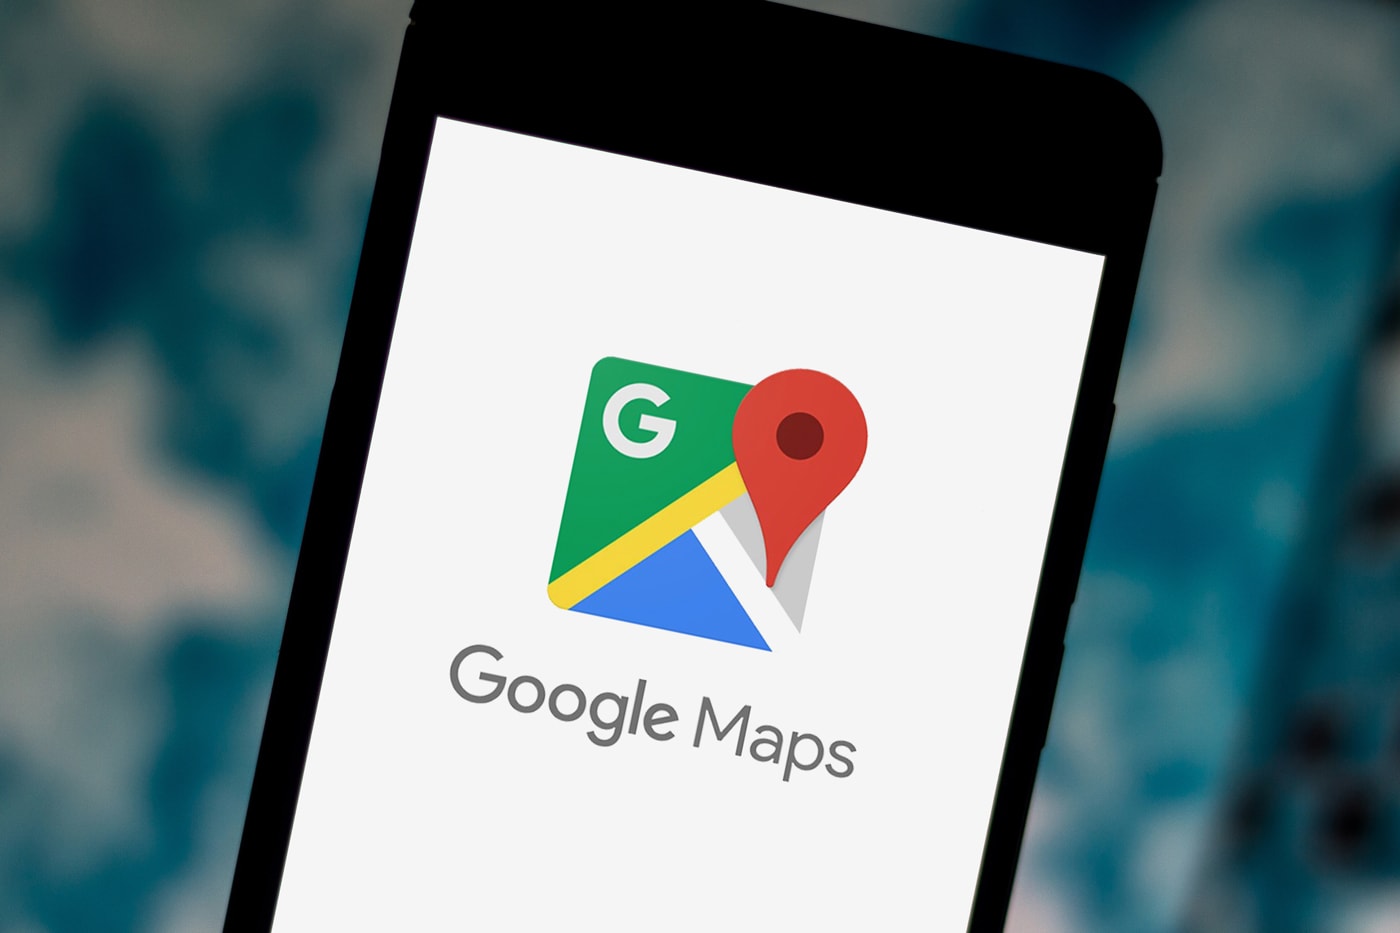 Google Maps Update Feature Delivery options Highlights support local eateries pandemic COVID 19 coronavirus takeout US Canada France